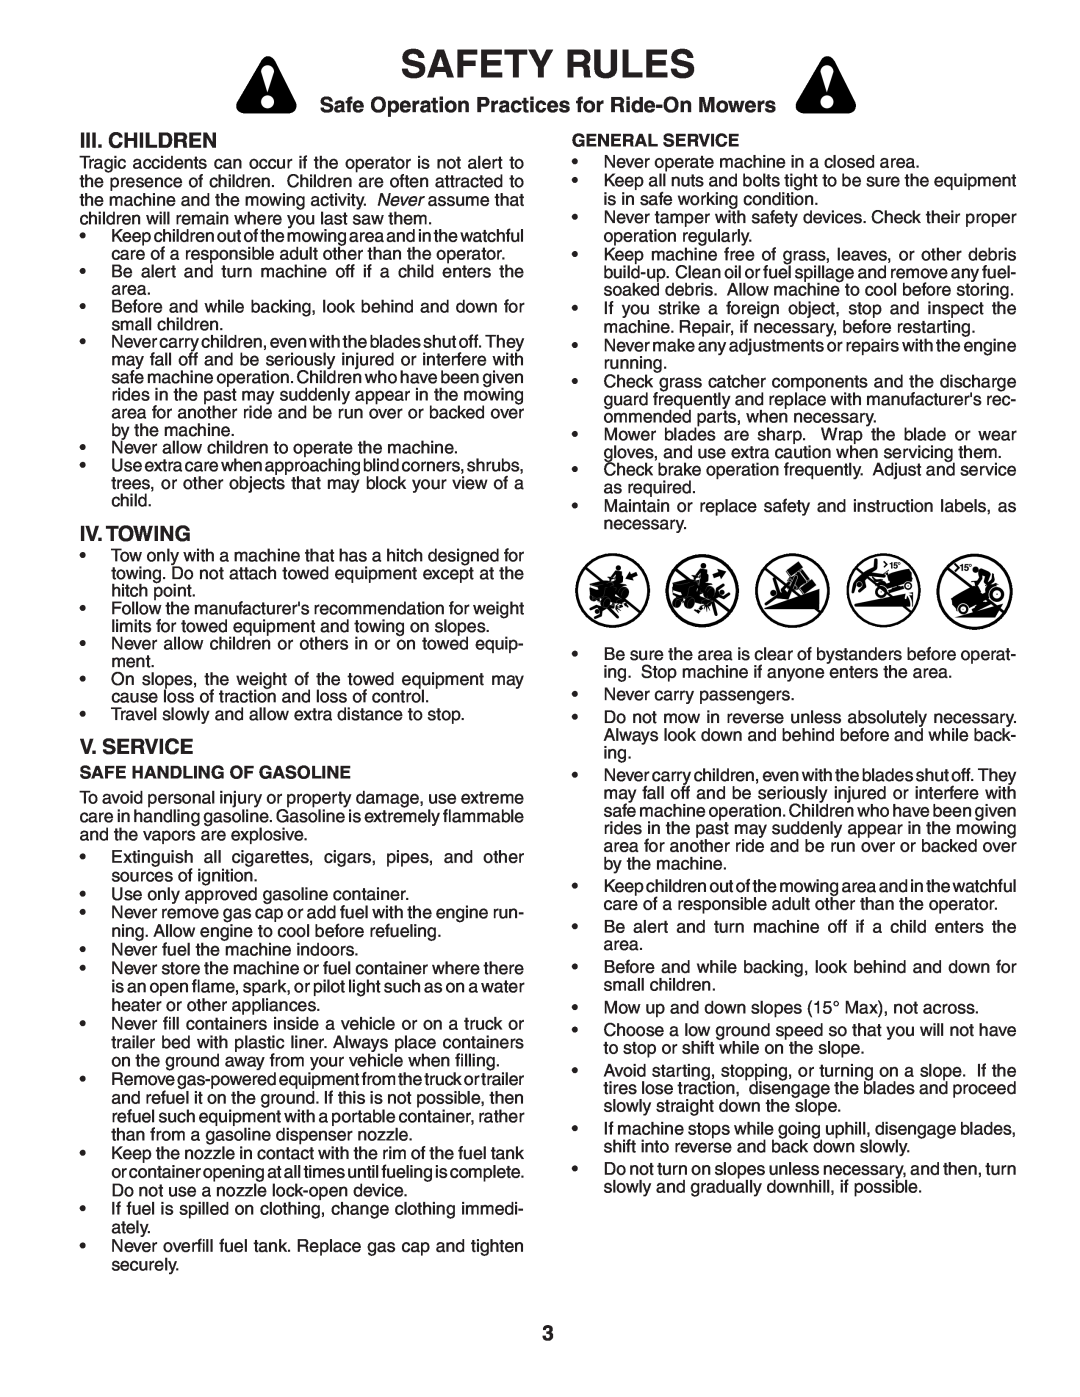 Poulan PBGT22H48 manual Iii. Children, Iv. Towing, V. Service, Safety Rules, Safe Operation Practices for Ride-On Mowers 